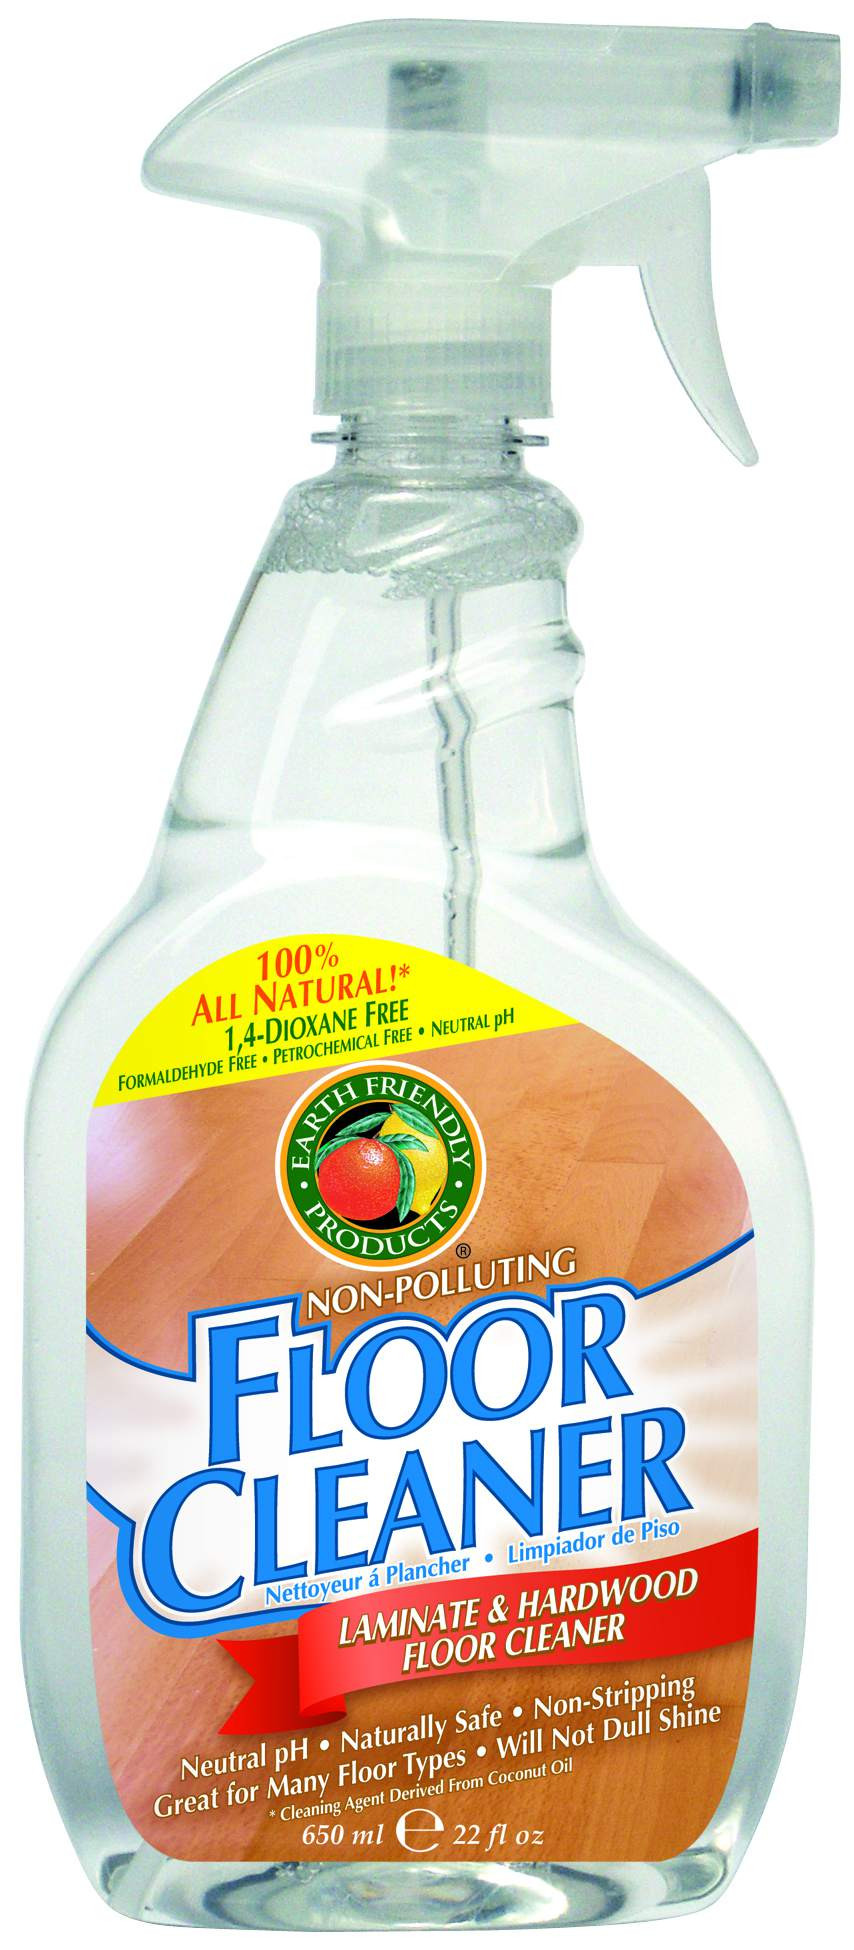 Can You Clean Hardwood Floors with Vinegar and Water Of Adore Your Wood Floors with these Eco Friendly Cleaners with Earth Friendly Products Floor Cleaner9725 Floorcleaner Aug10 56a45e363df78cf772820af4